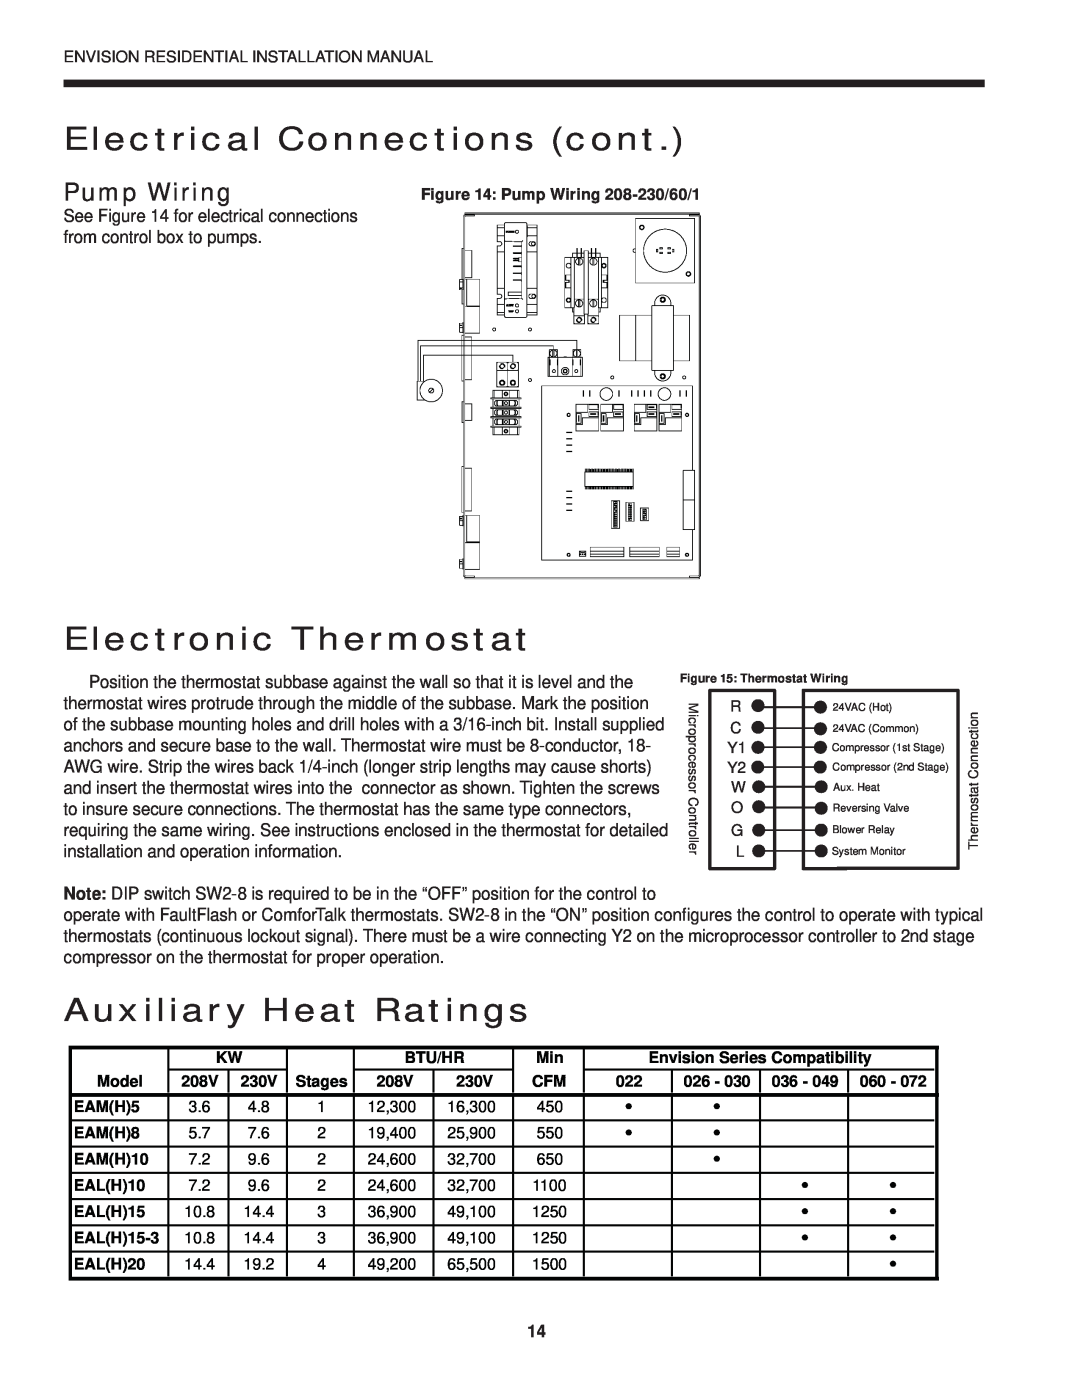 Envision Peripherals R-410A Electrical Connections cont, Electronic Thermostat, Auxiliary Heat Ratings, Pump Wiring 